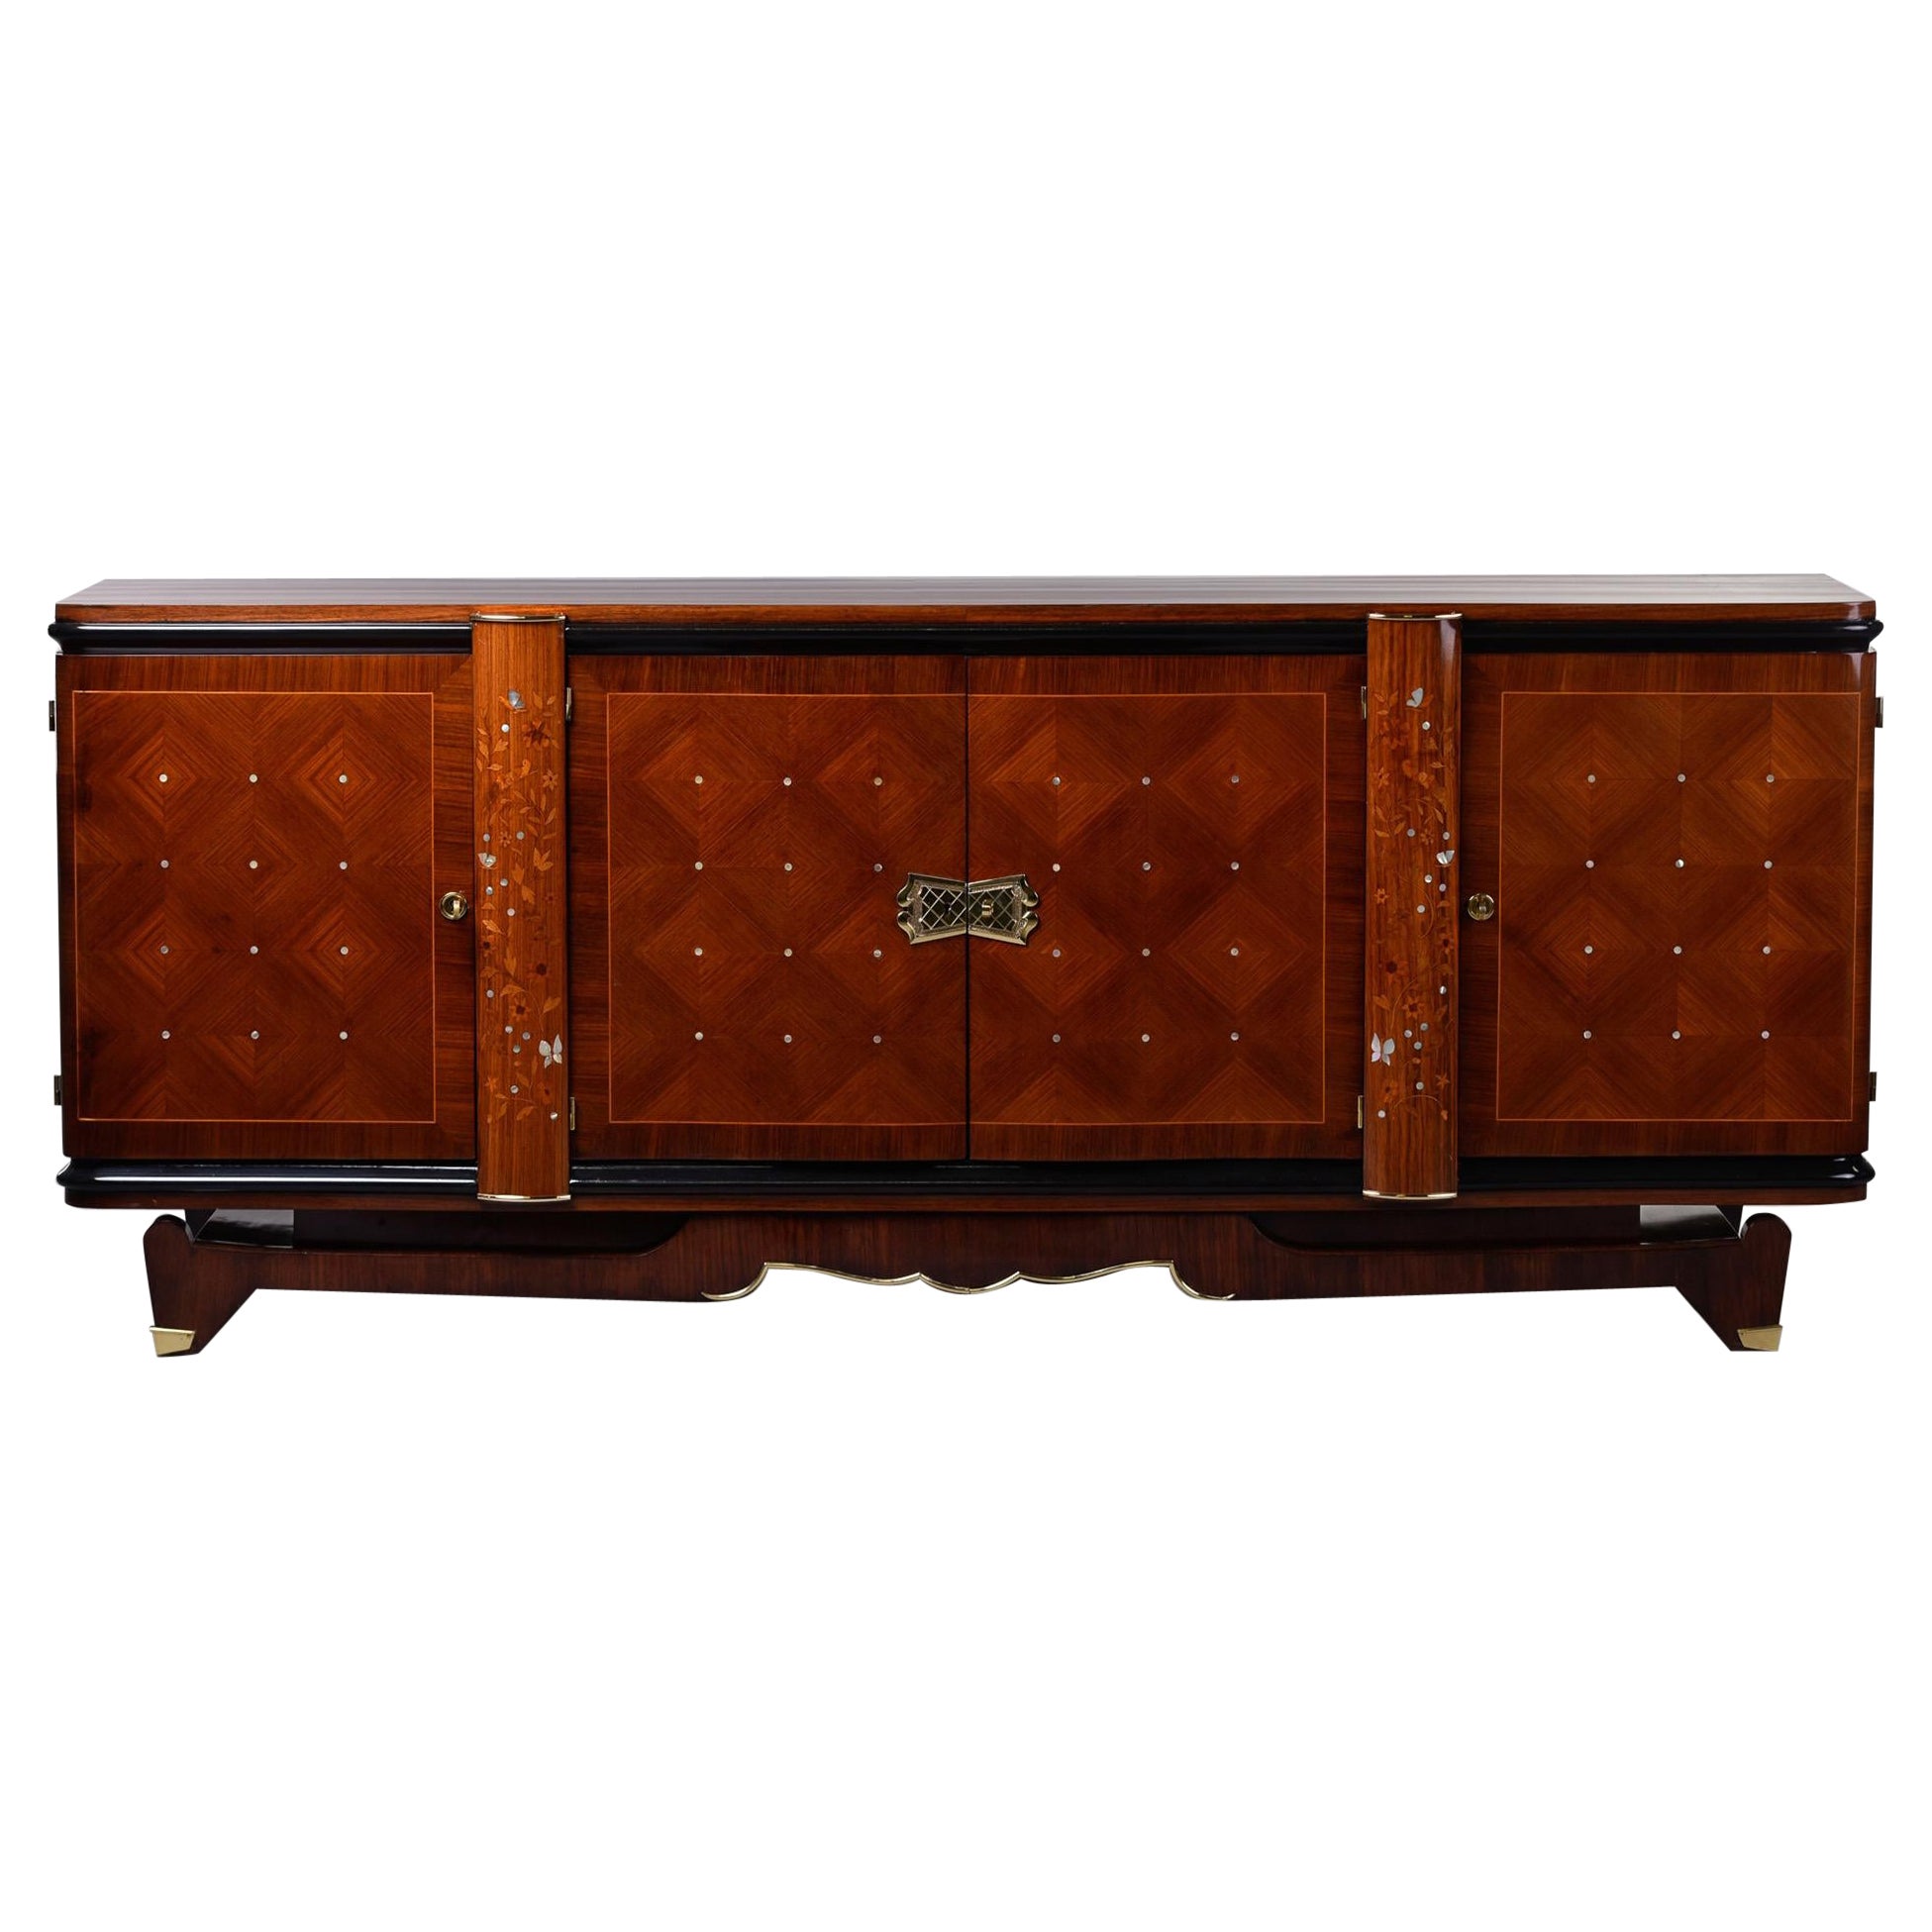 French Art Deco Palisandre Sideboard or Buffet with Mother of Pearl Inlay For Sale